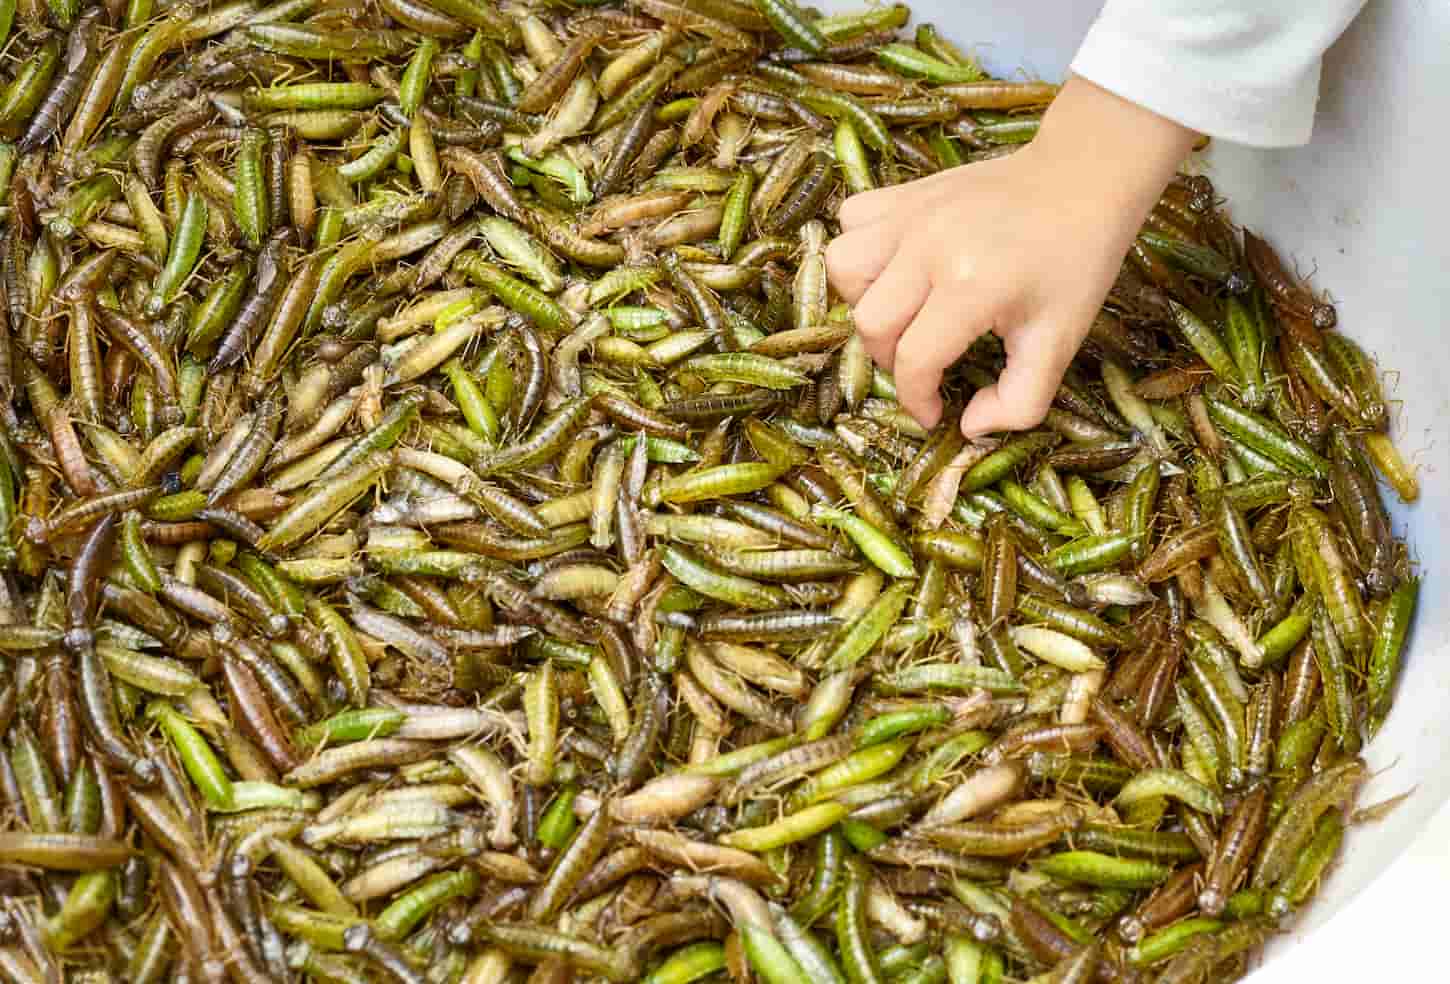 An image of a hand reaching for fresh edible insects on a local market.